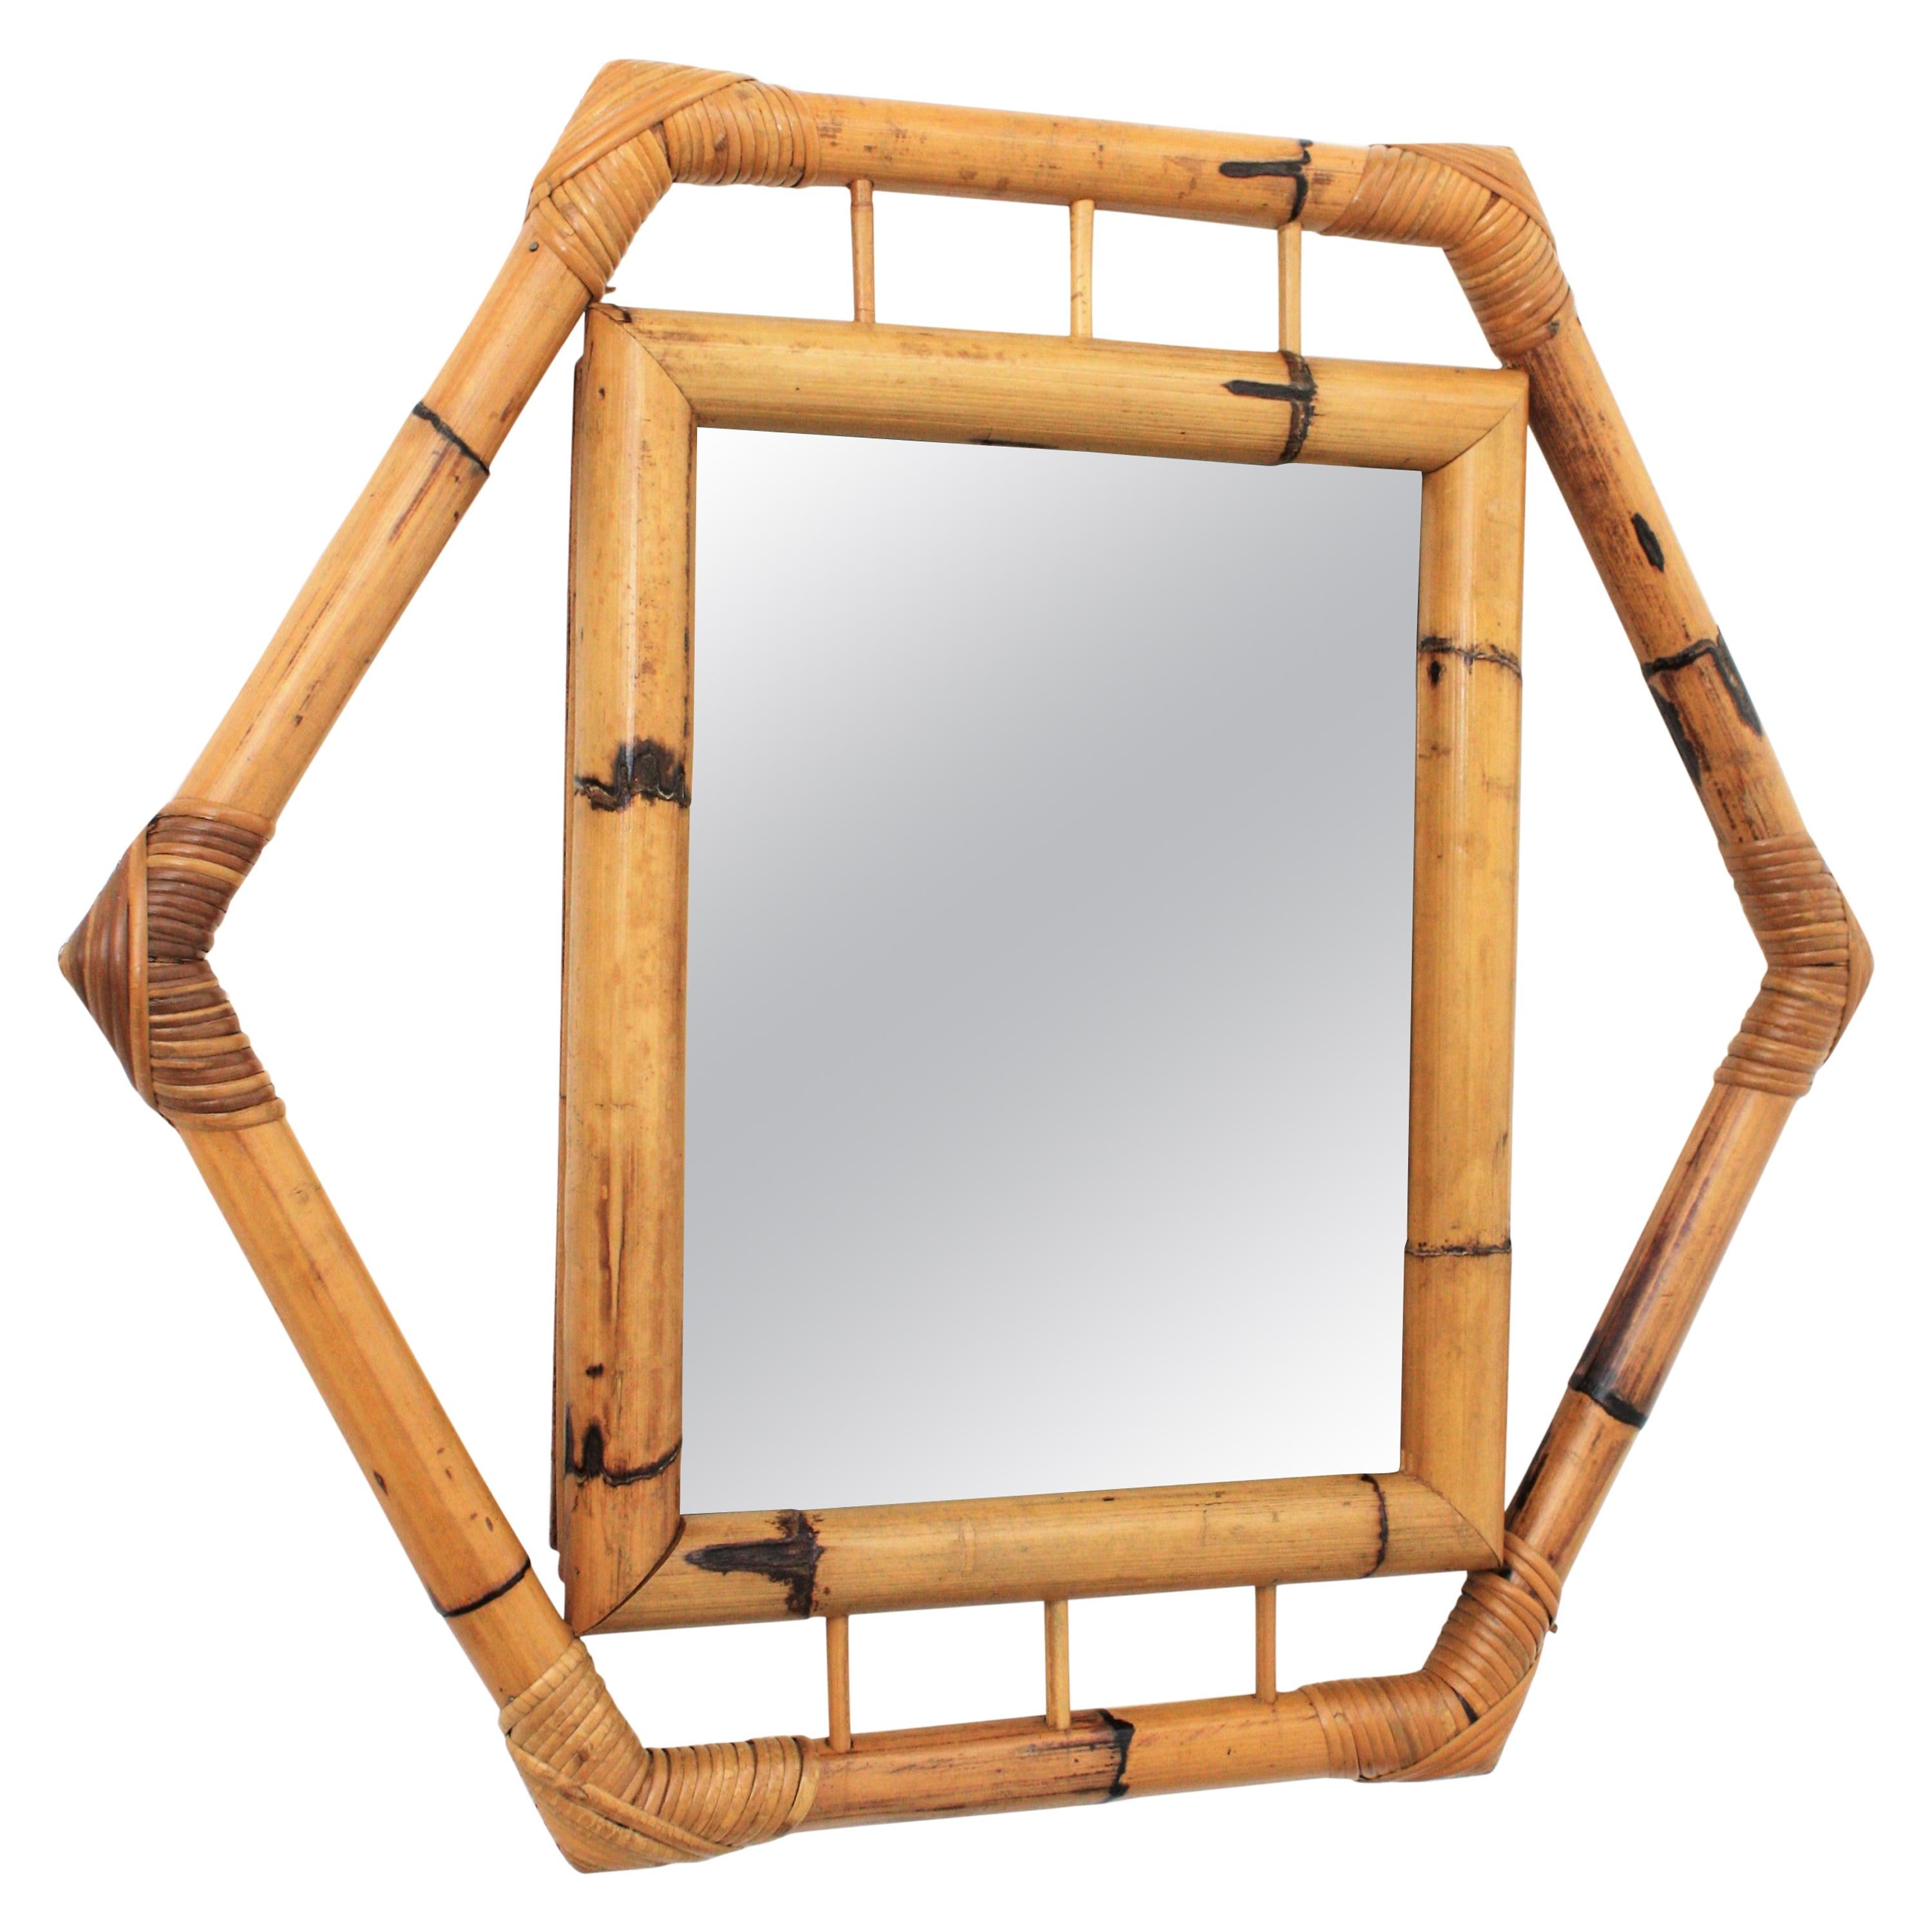 Bamboo Hexagonal Mirror with Smoked Glass, France, 1950s For Sale